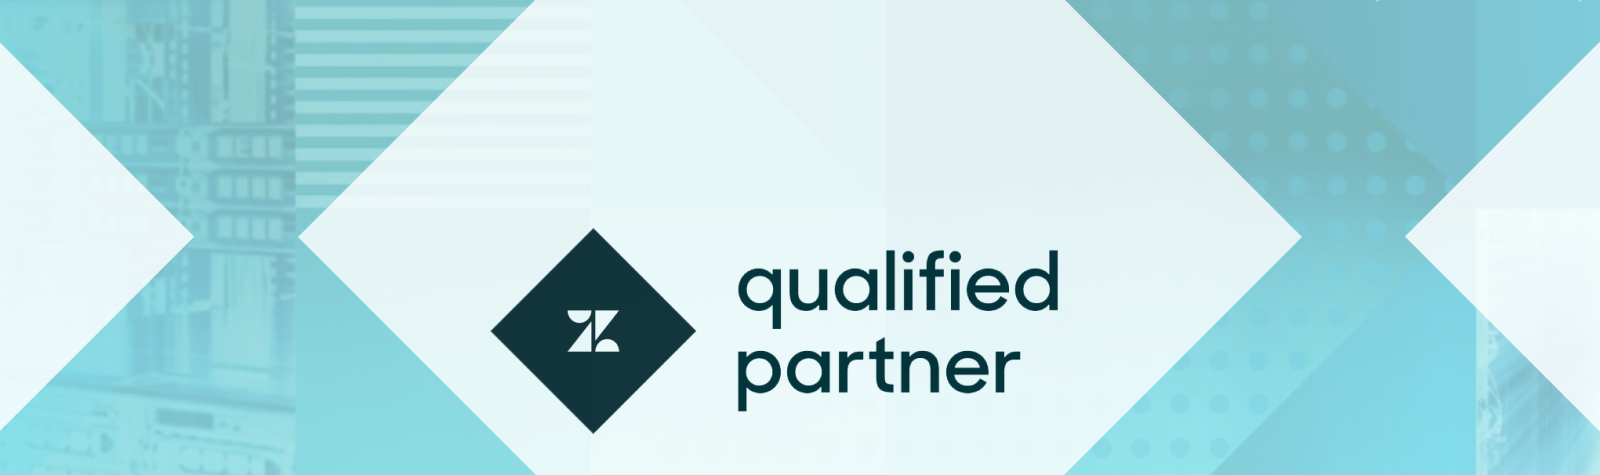 Bcame is a qualified partner of Zendesk